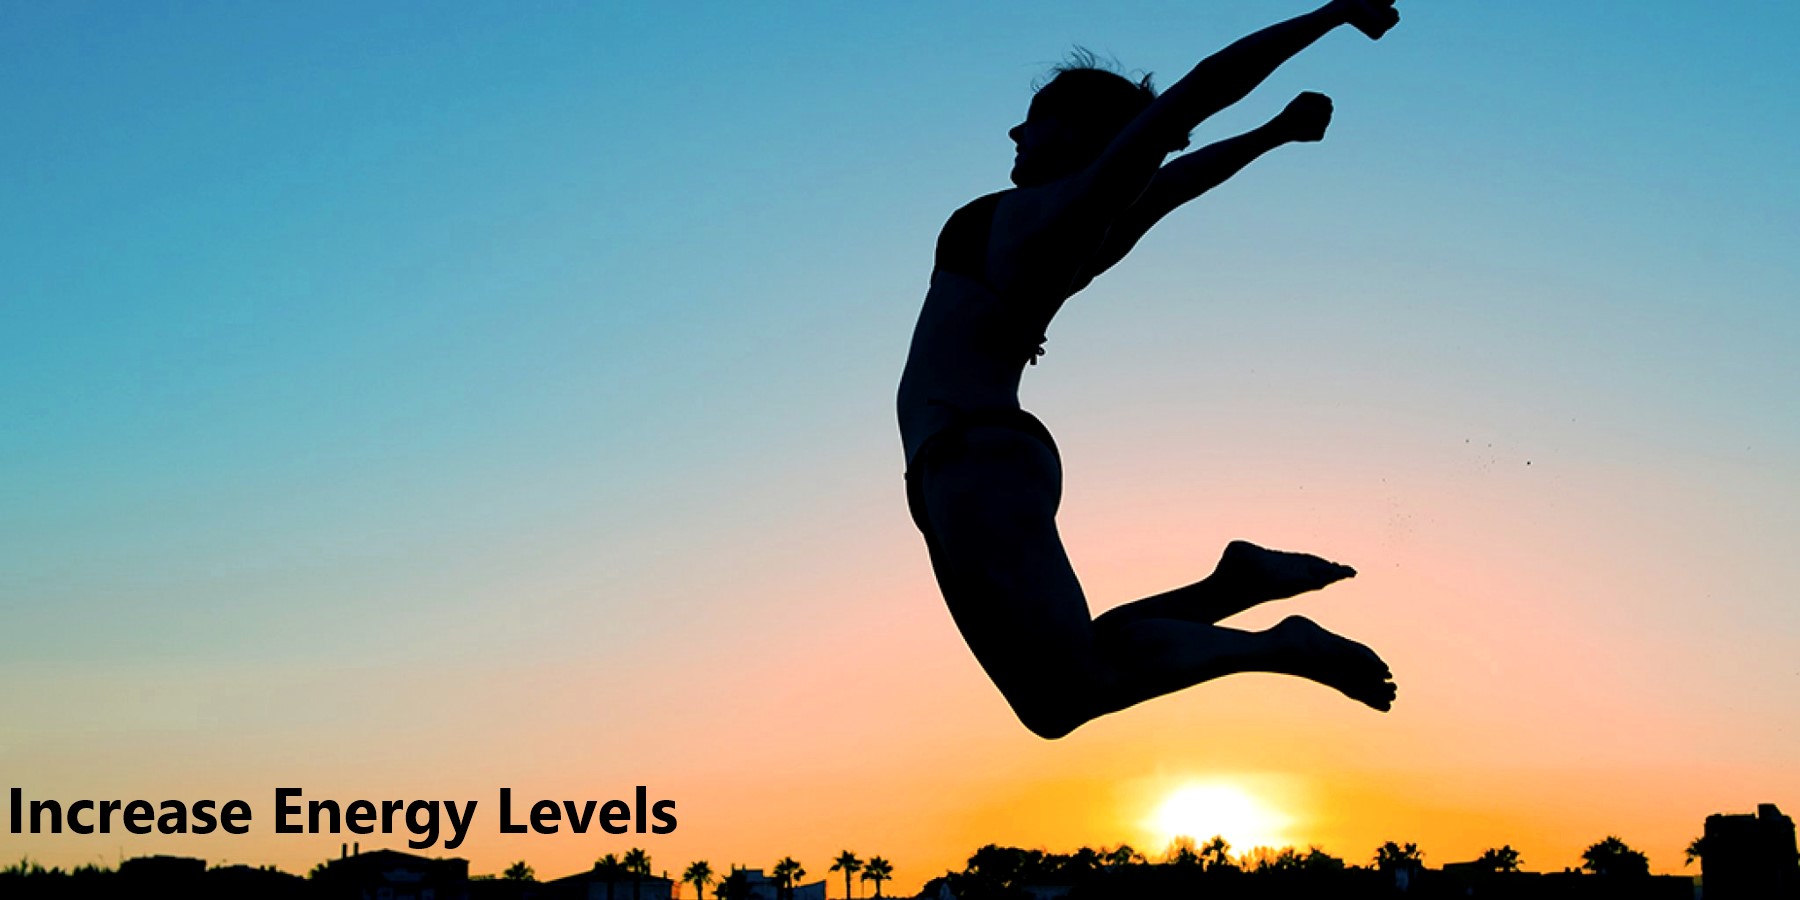 How to Increase Energy Levels After 50 Years